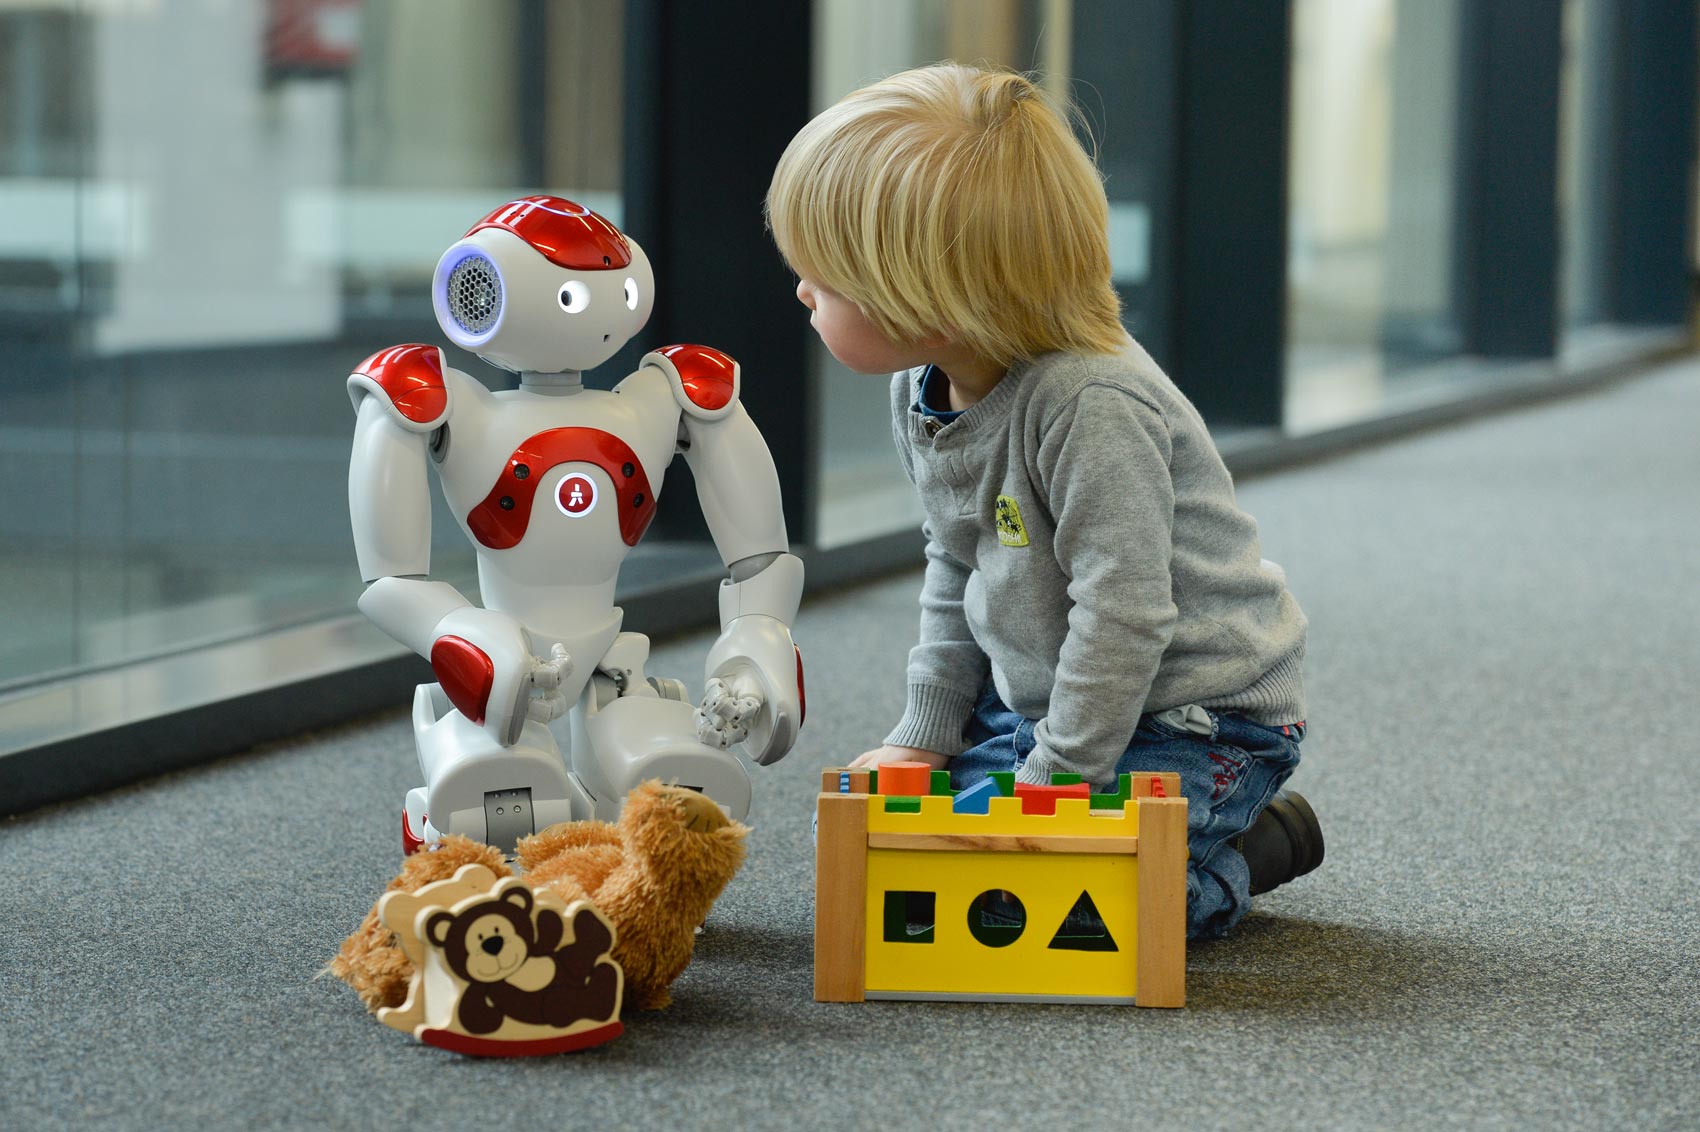 Child and robot play together